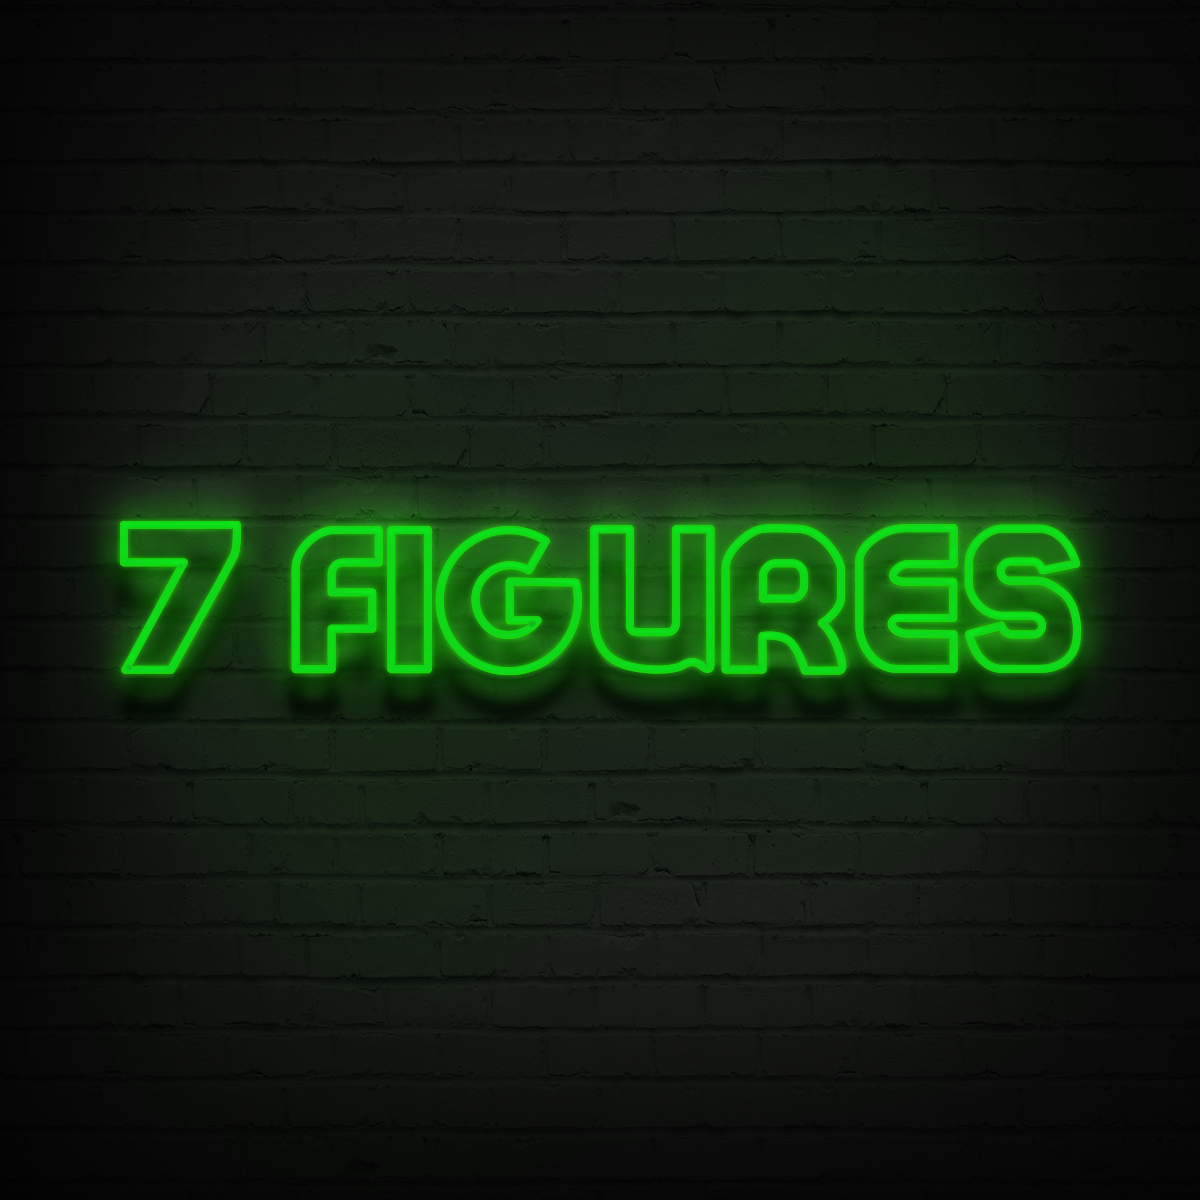 '7 Figures' LED Neon Sign